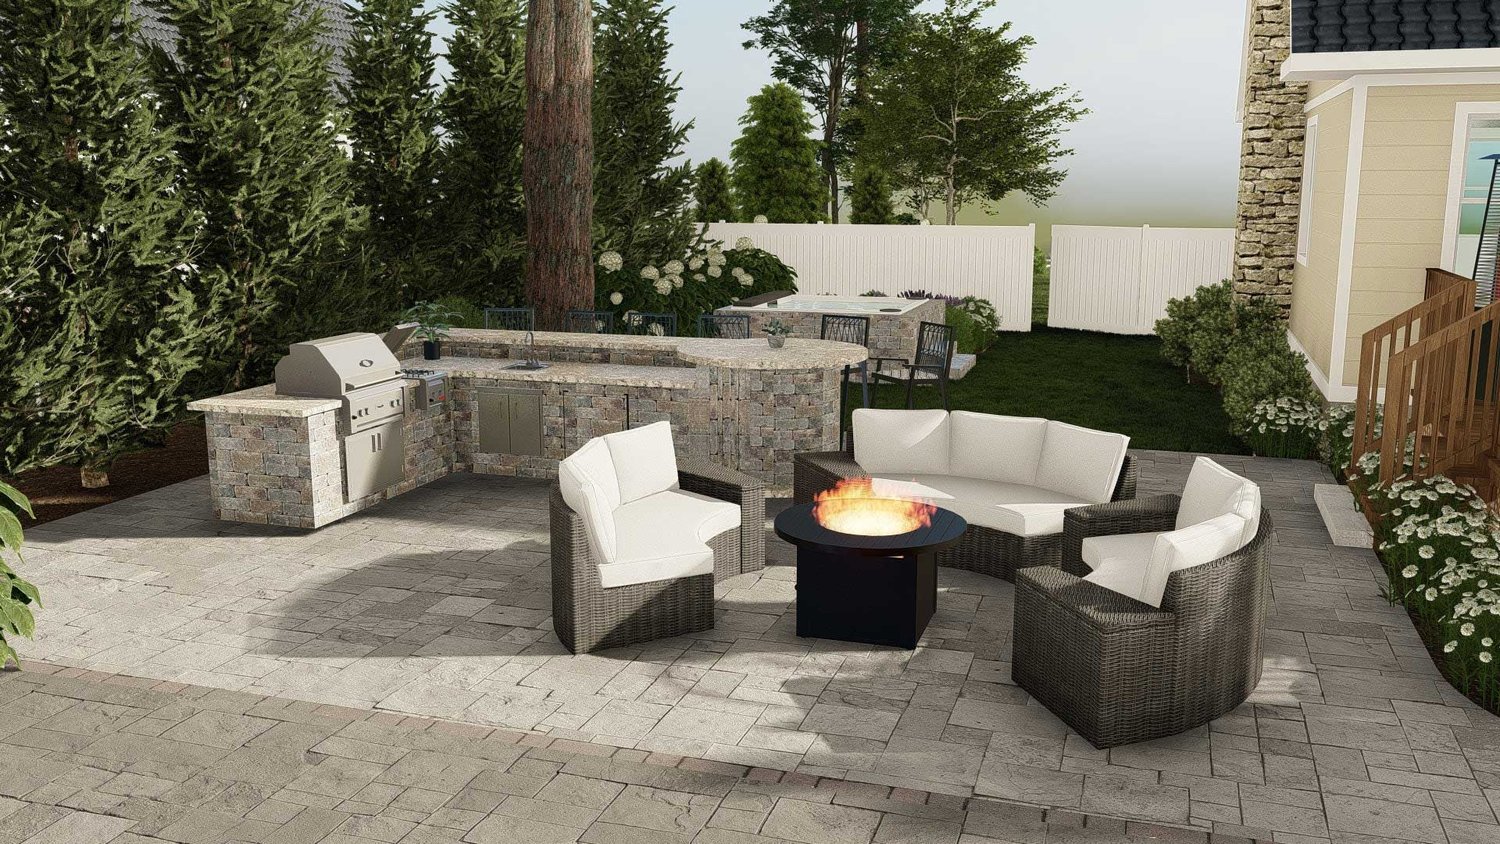 Ocean City backyard concrete paver patio with fire pit seating area and outdoor kitchen